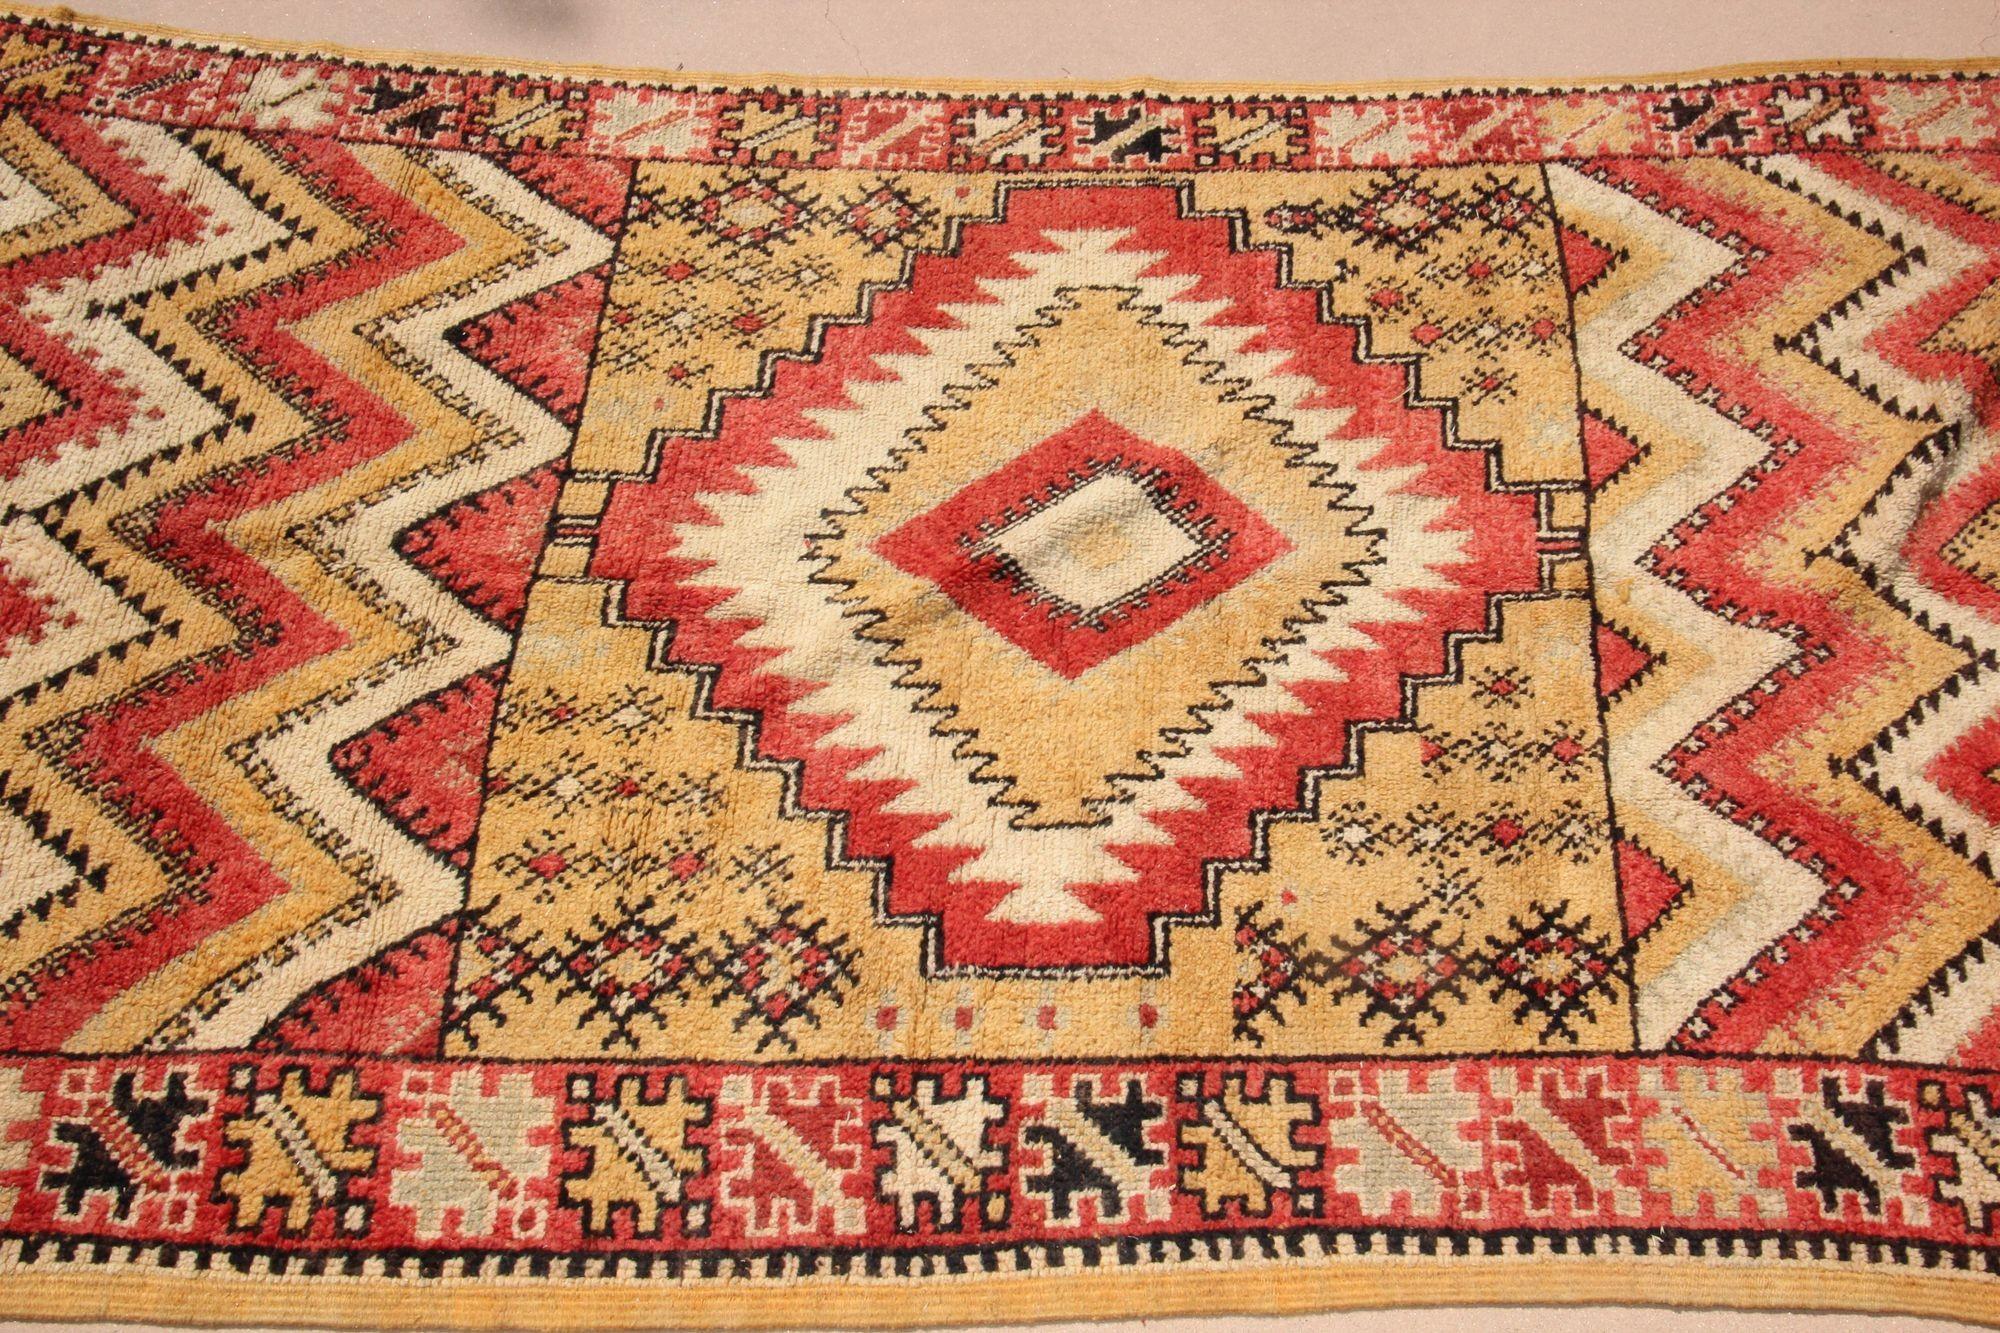 Tribal 1960s Moroccan authentic Berber Rug Orange Yellow and Ivory 10 ft x 5ft. For Sale